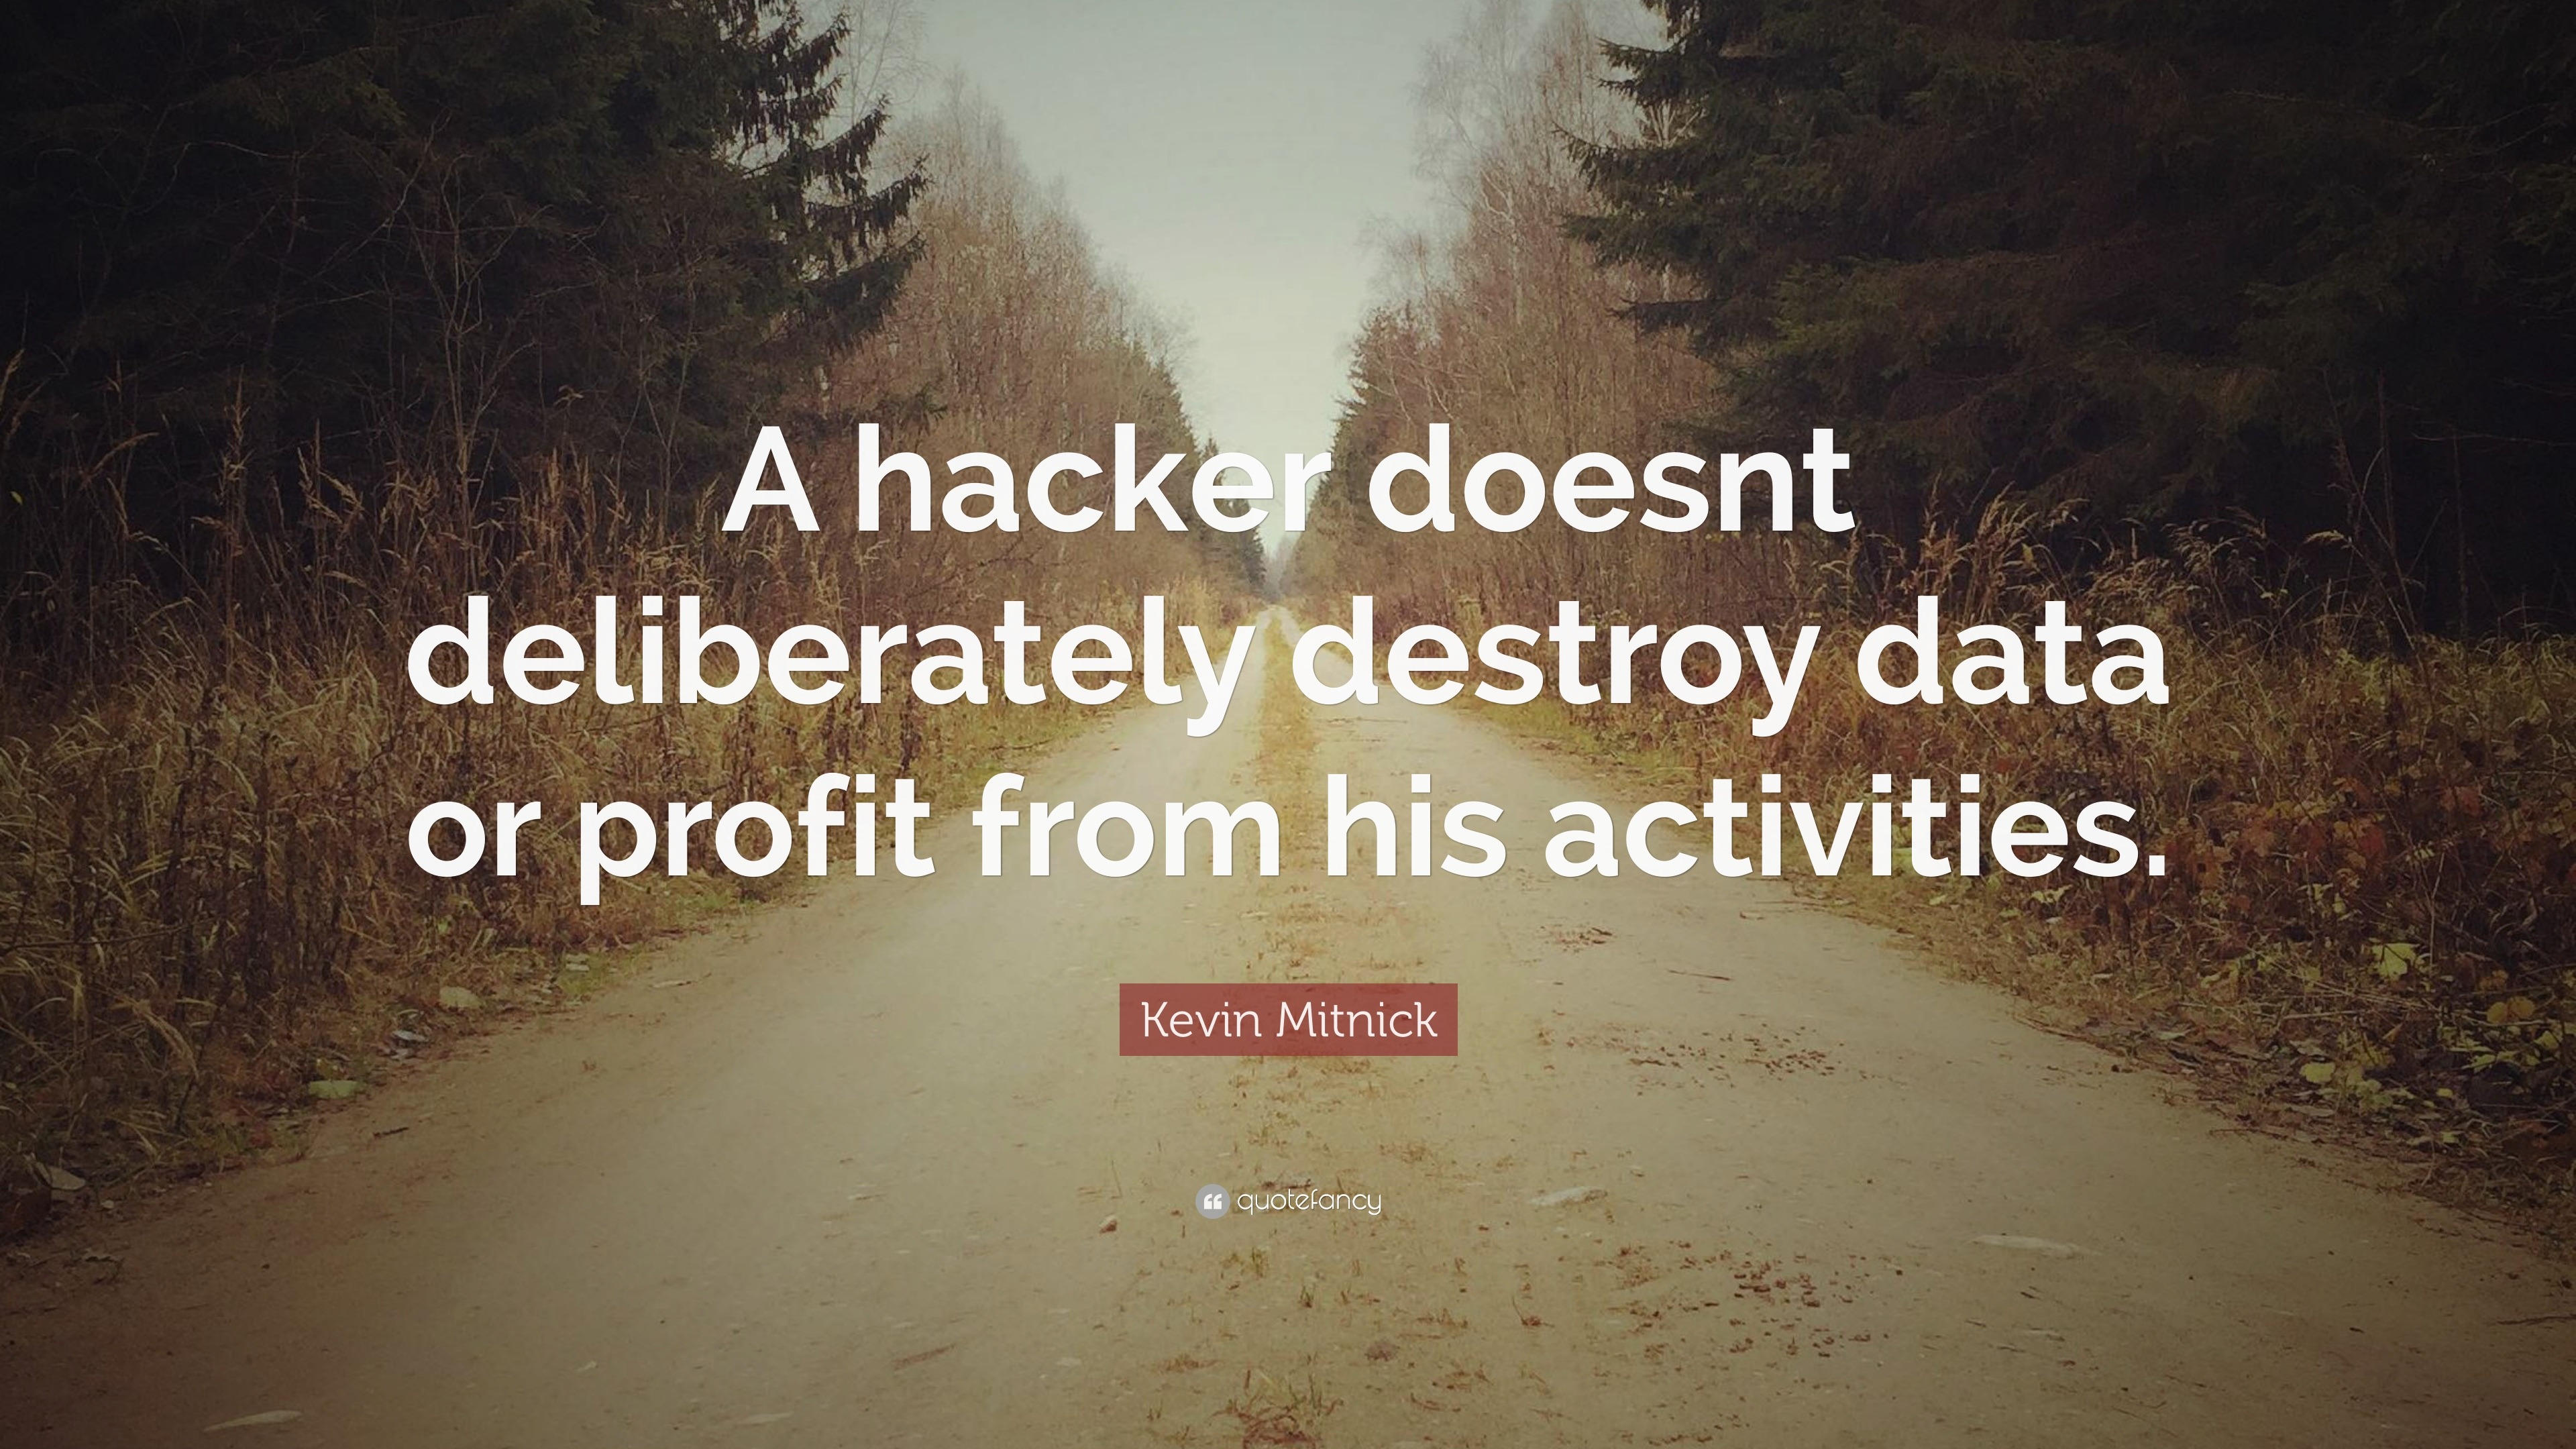 Kevin Mitnick Quote “A hacker doesnt deliberately destroy data or